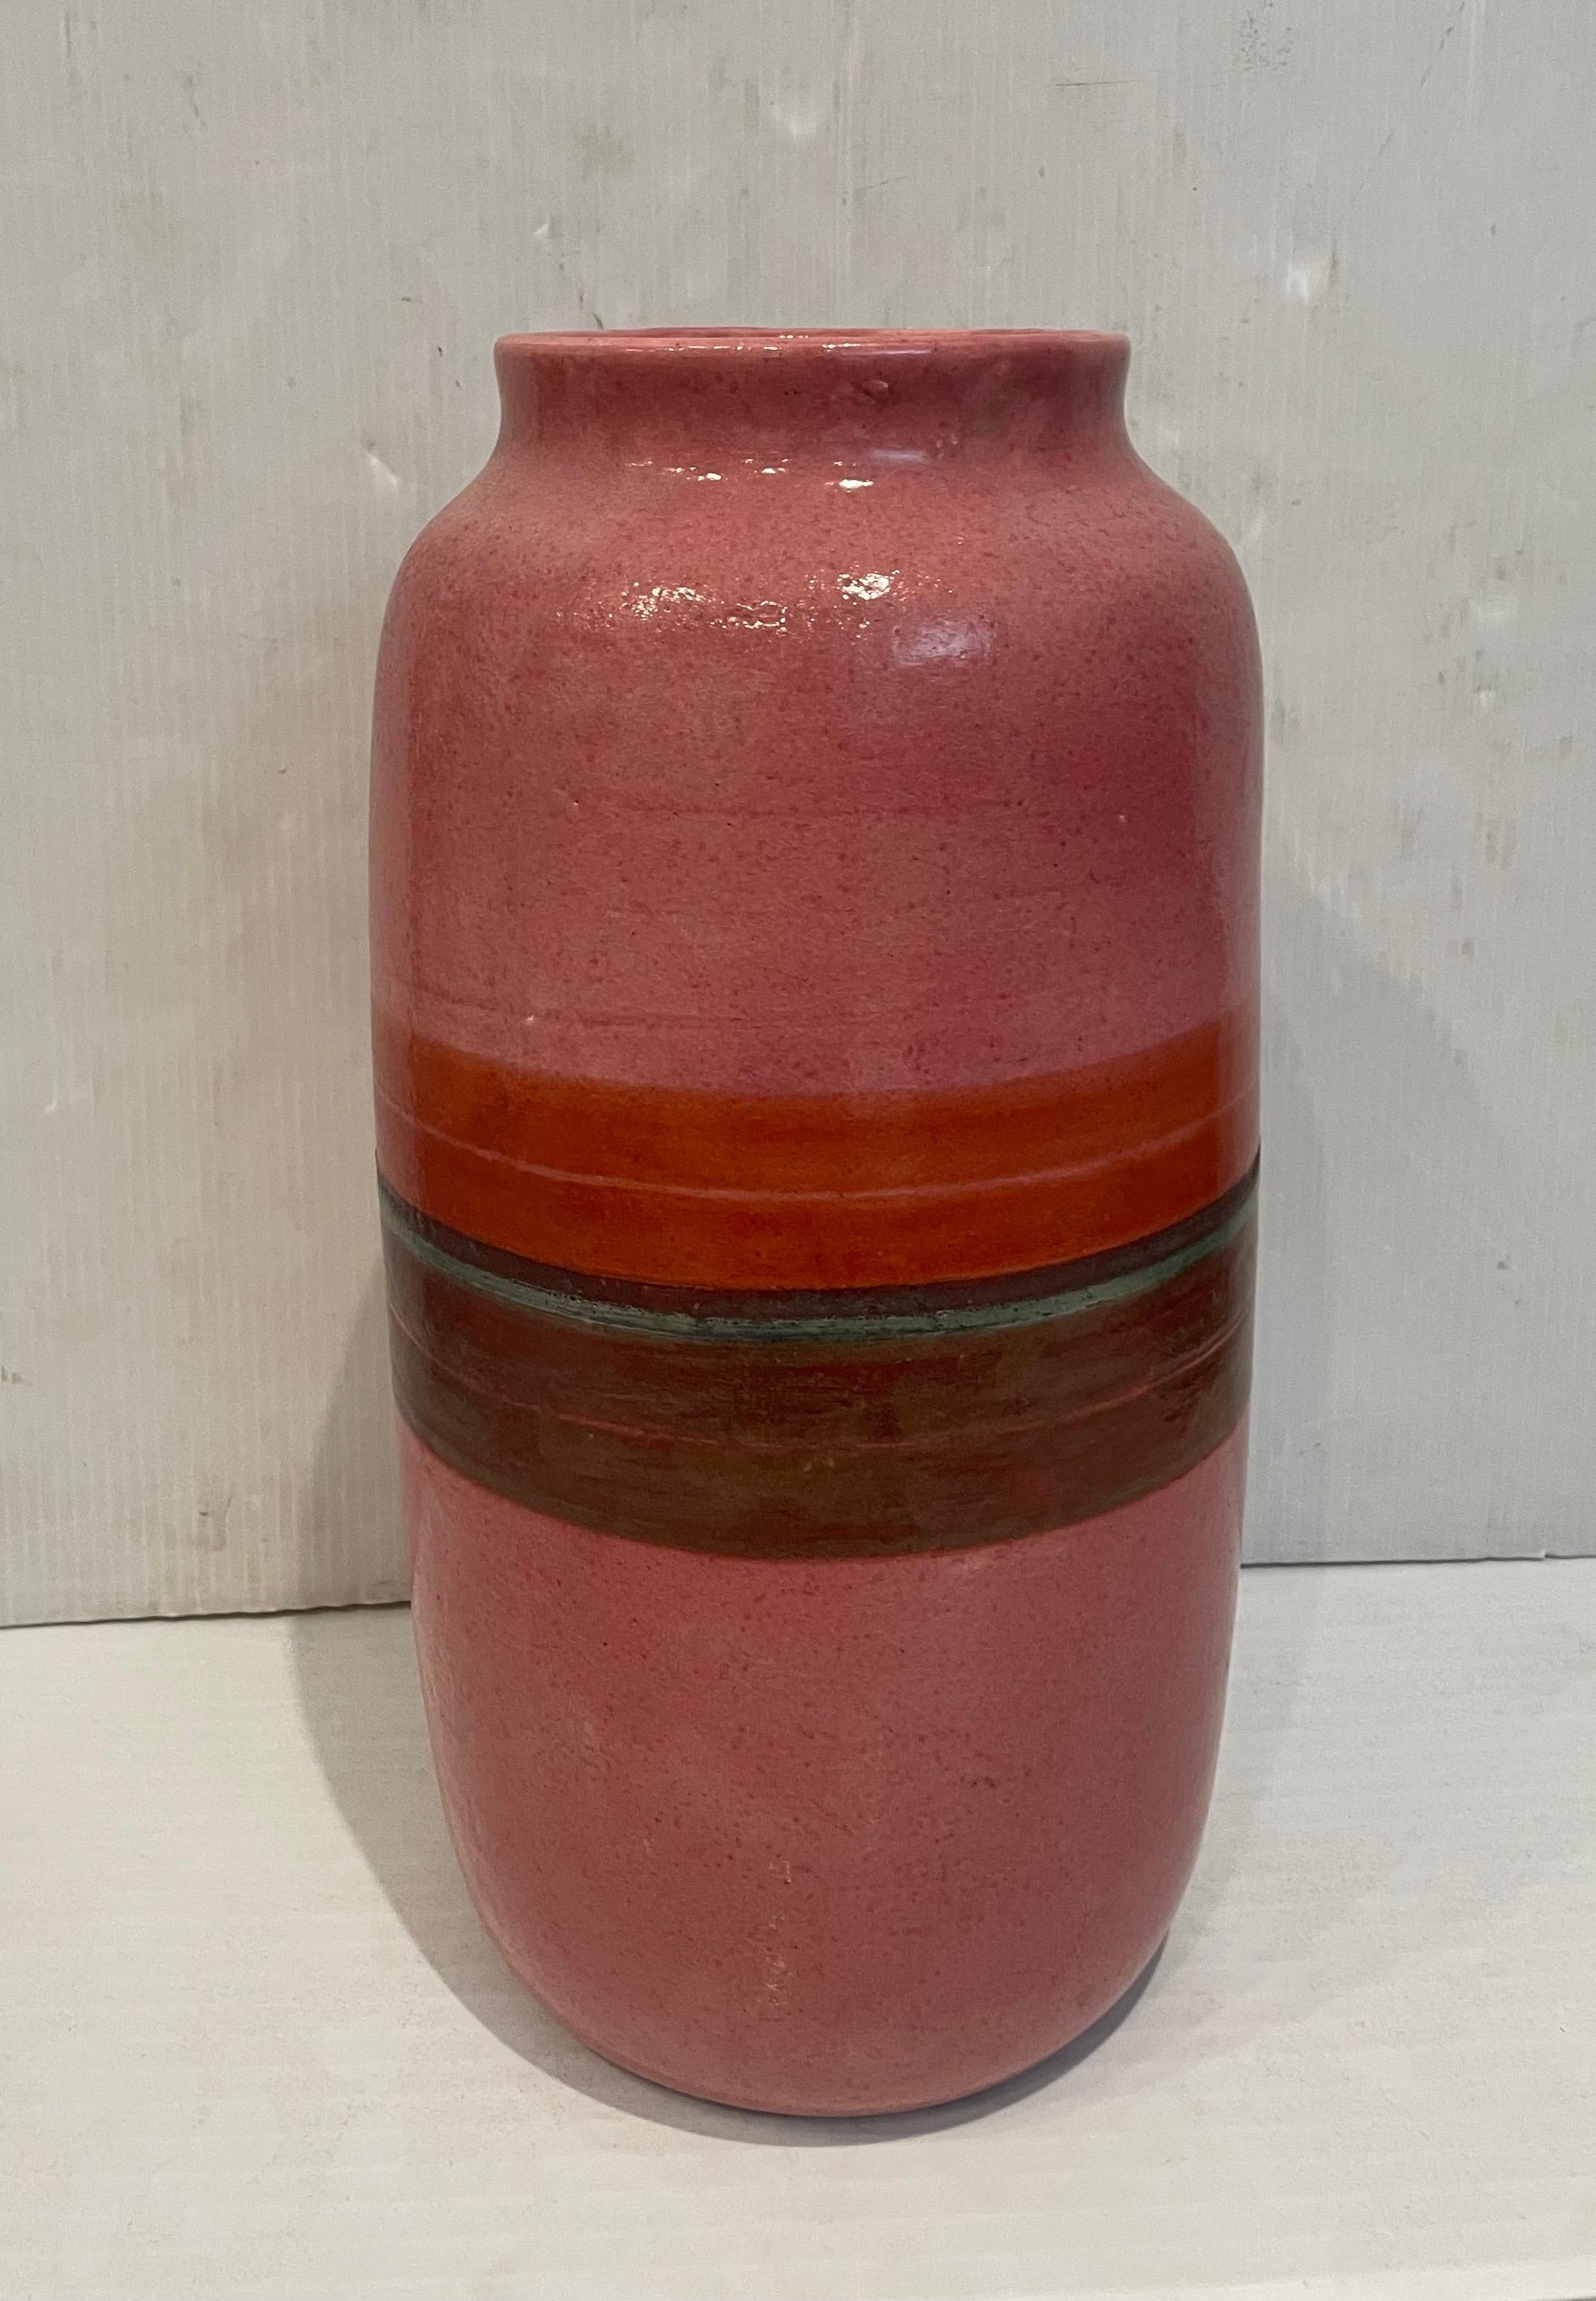 Beautiful color and glaze on this rare tall Vase by Bruno Gambone Italy circa 1960's, excellent condition no chips or cracks.